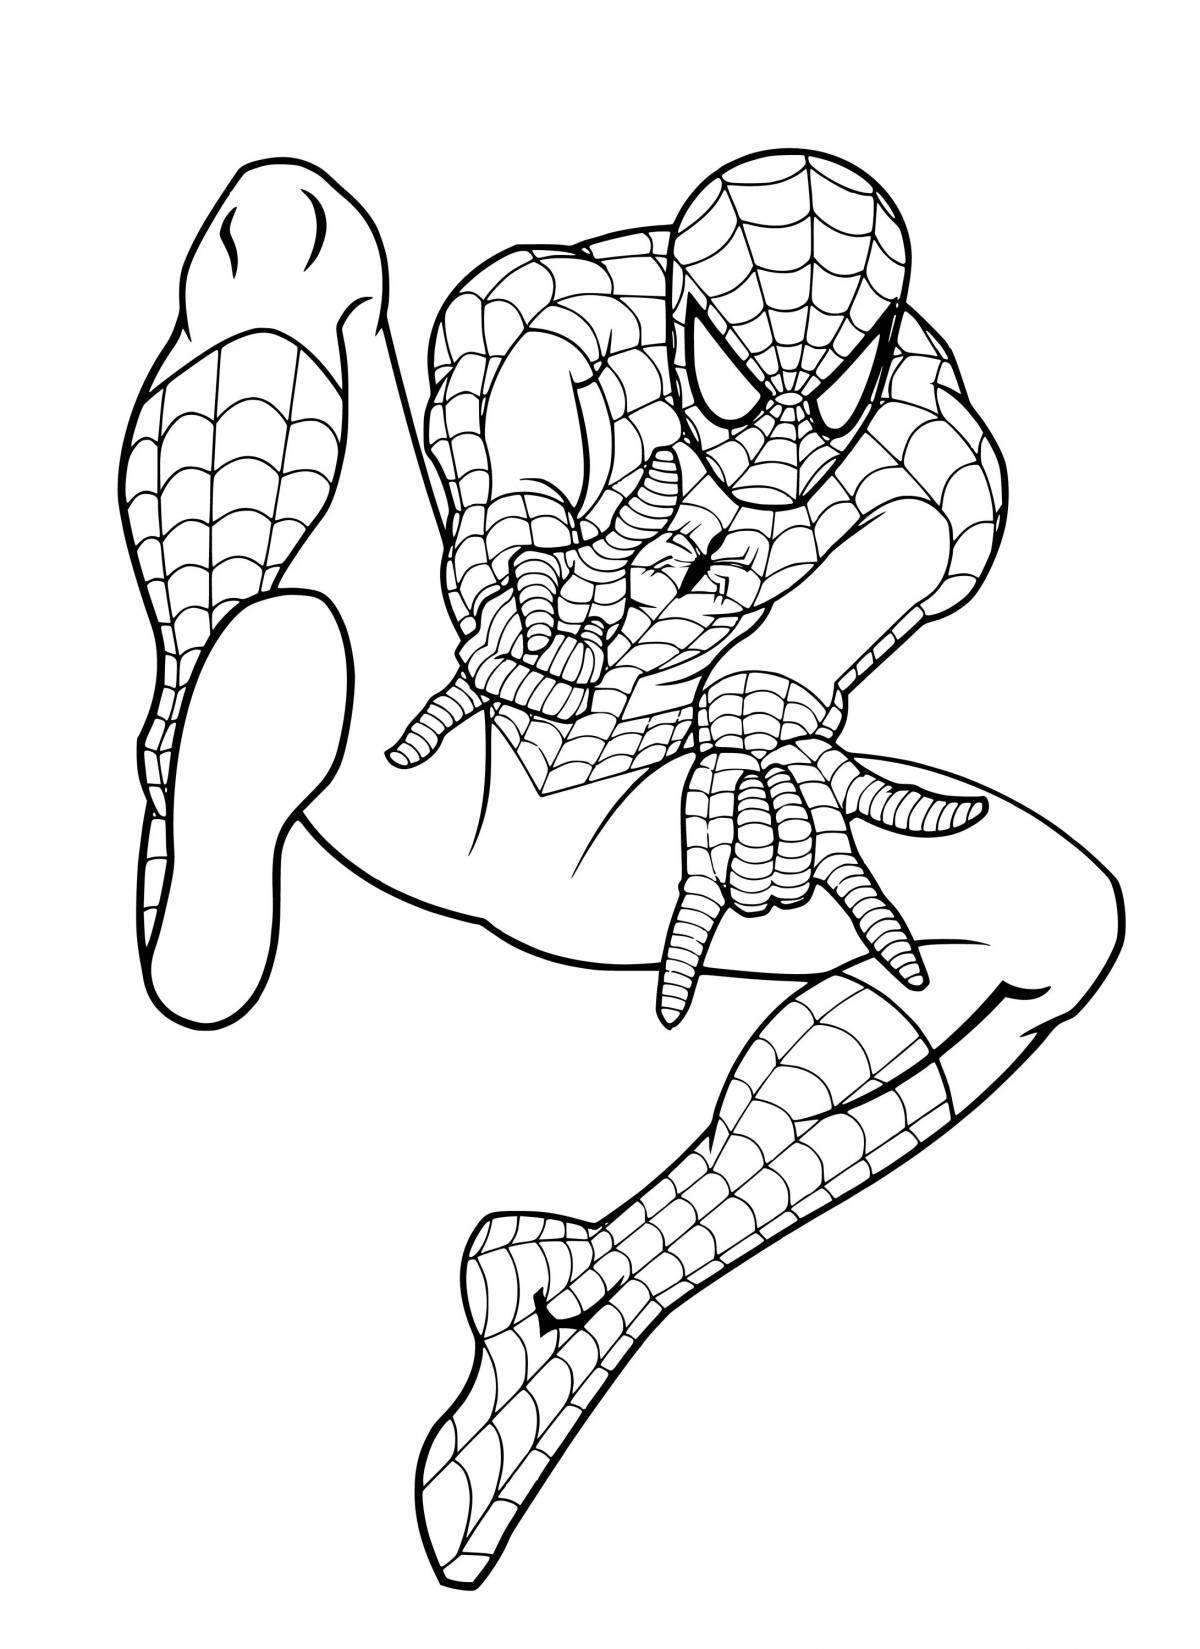 Spiderman for kids 5 years old #9